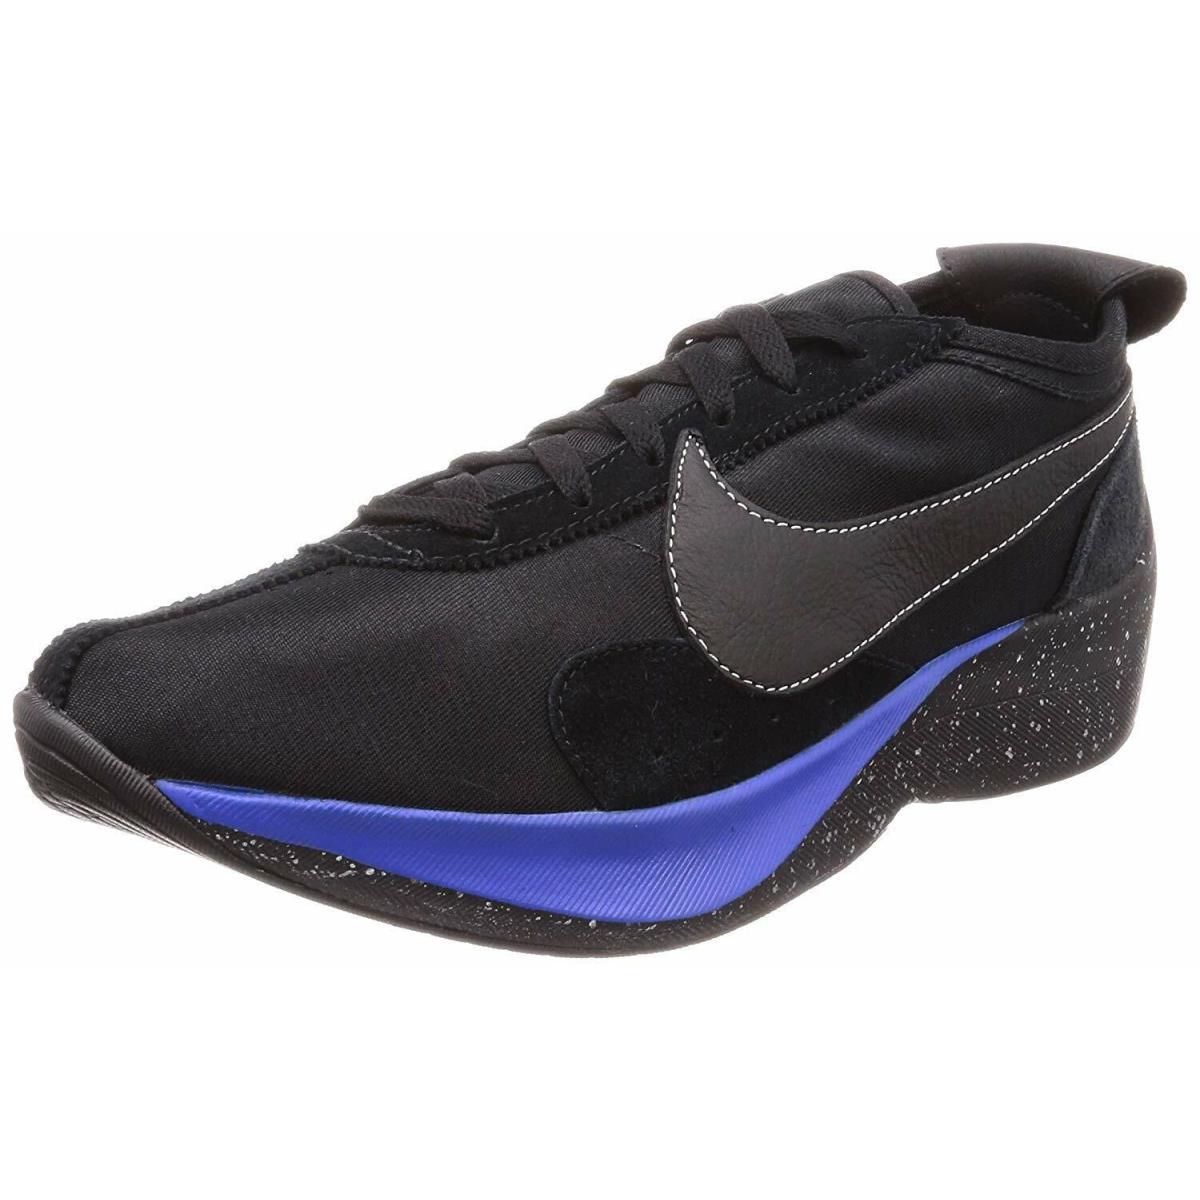 Nike Moon Racer QS Mens Running Shoes BV7779 001 Size 11 in The Box